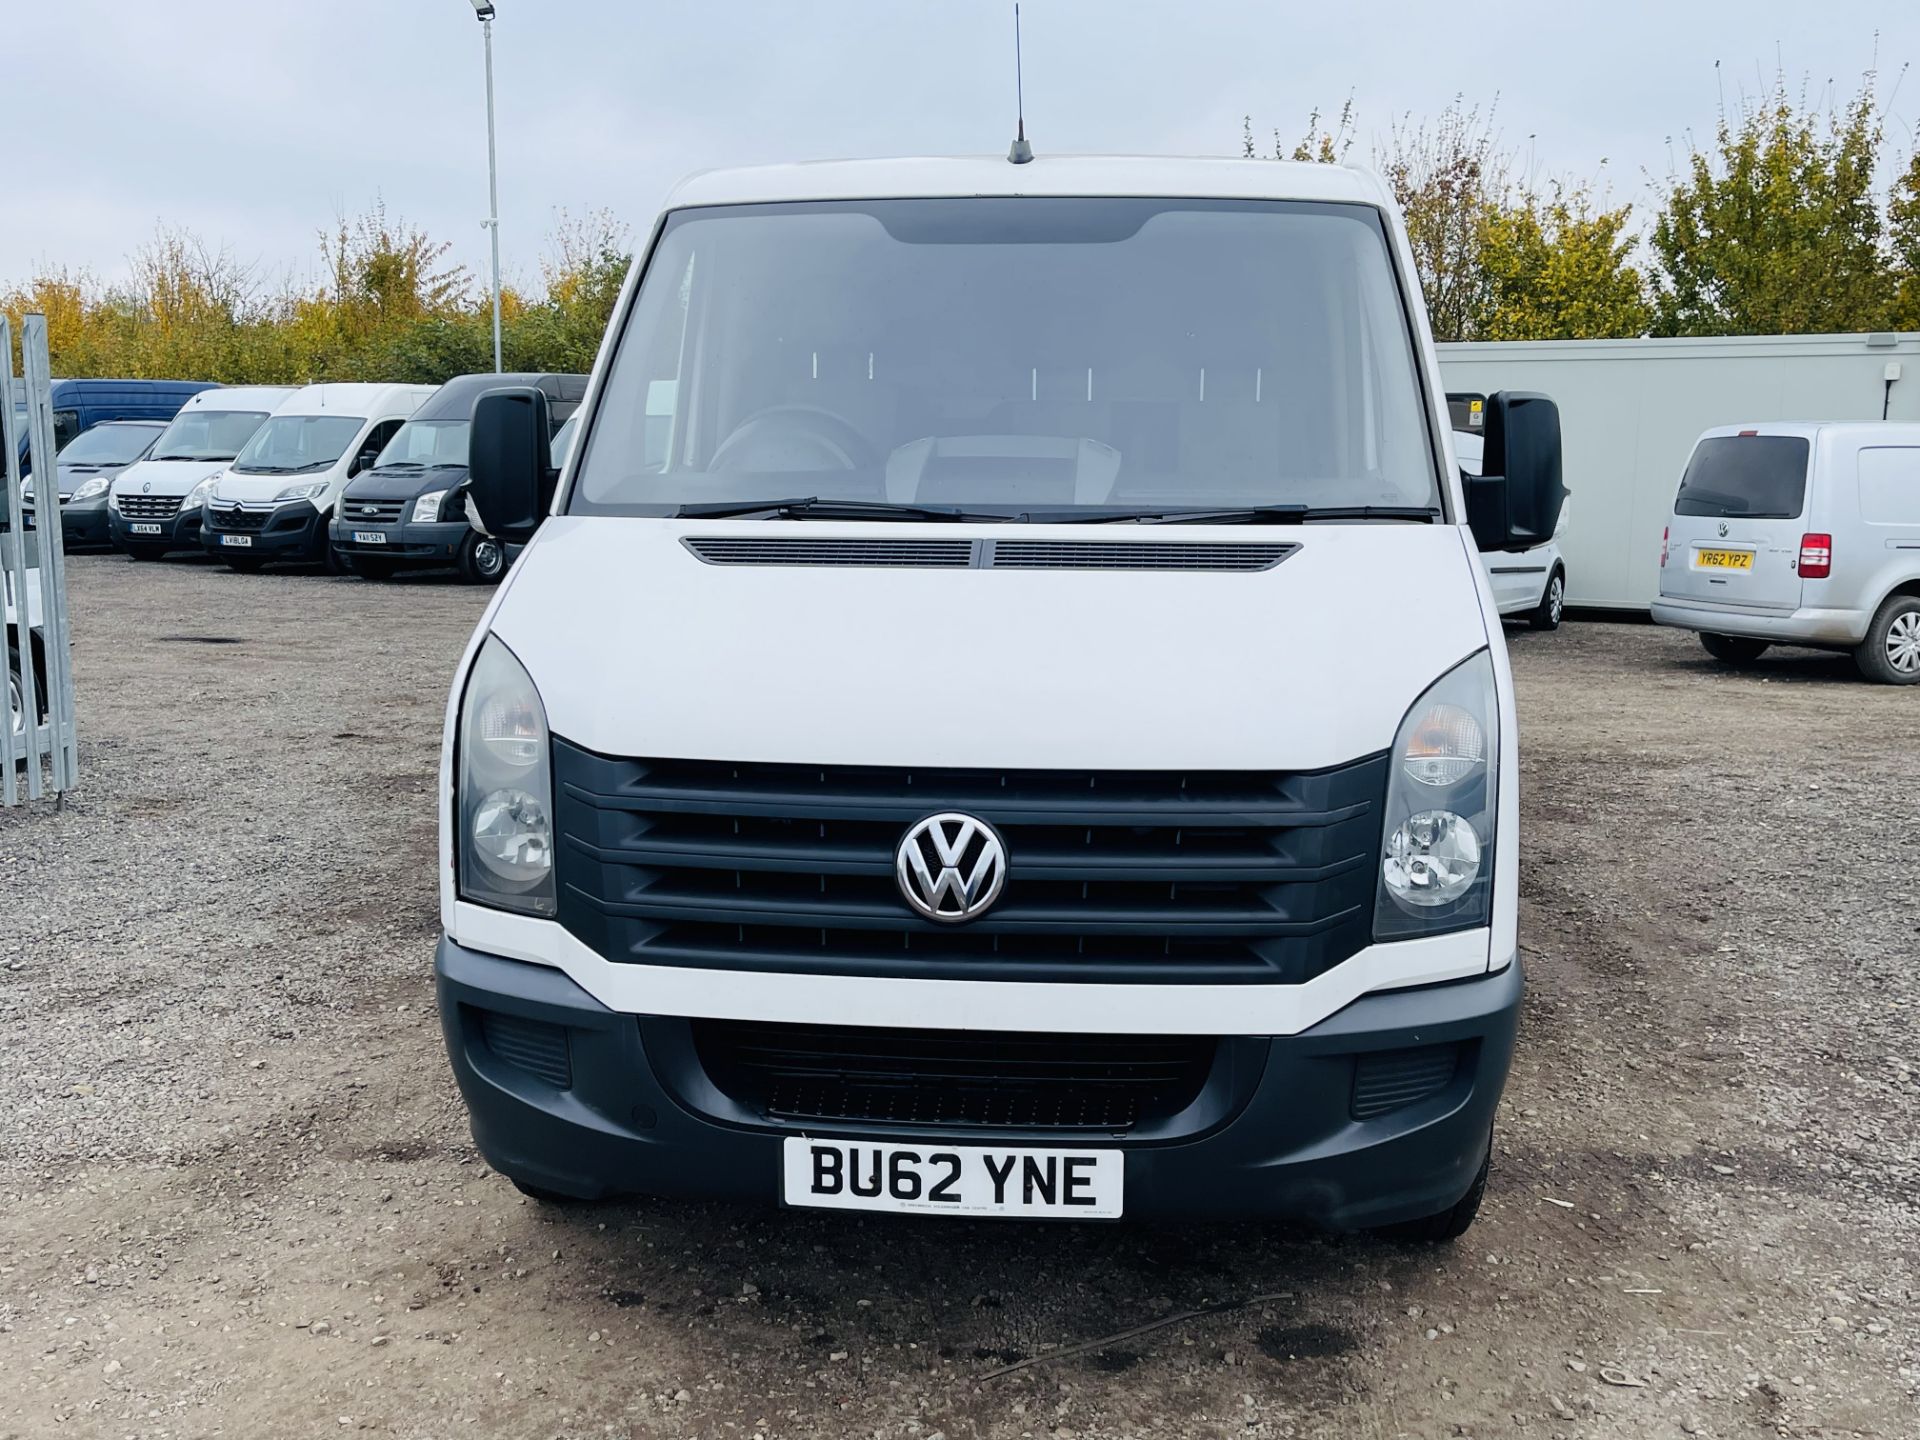 Volkswagen Crafter CR30 2.0 TDI 109 L1 H1 2012 ' 62 Reg' - Air Con - No Vat Save 20% - Image 4 of 19